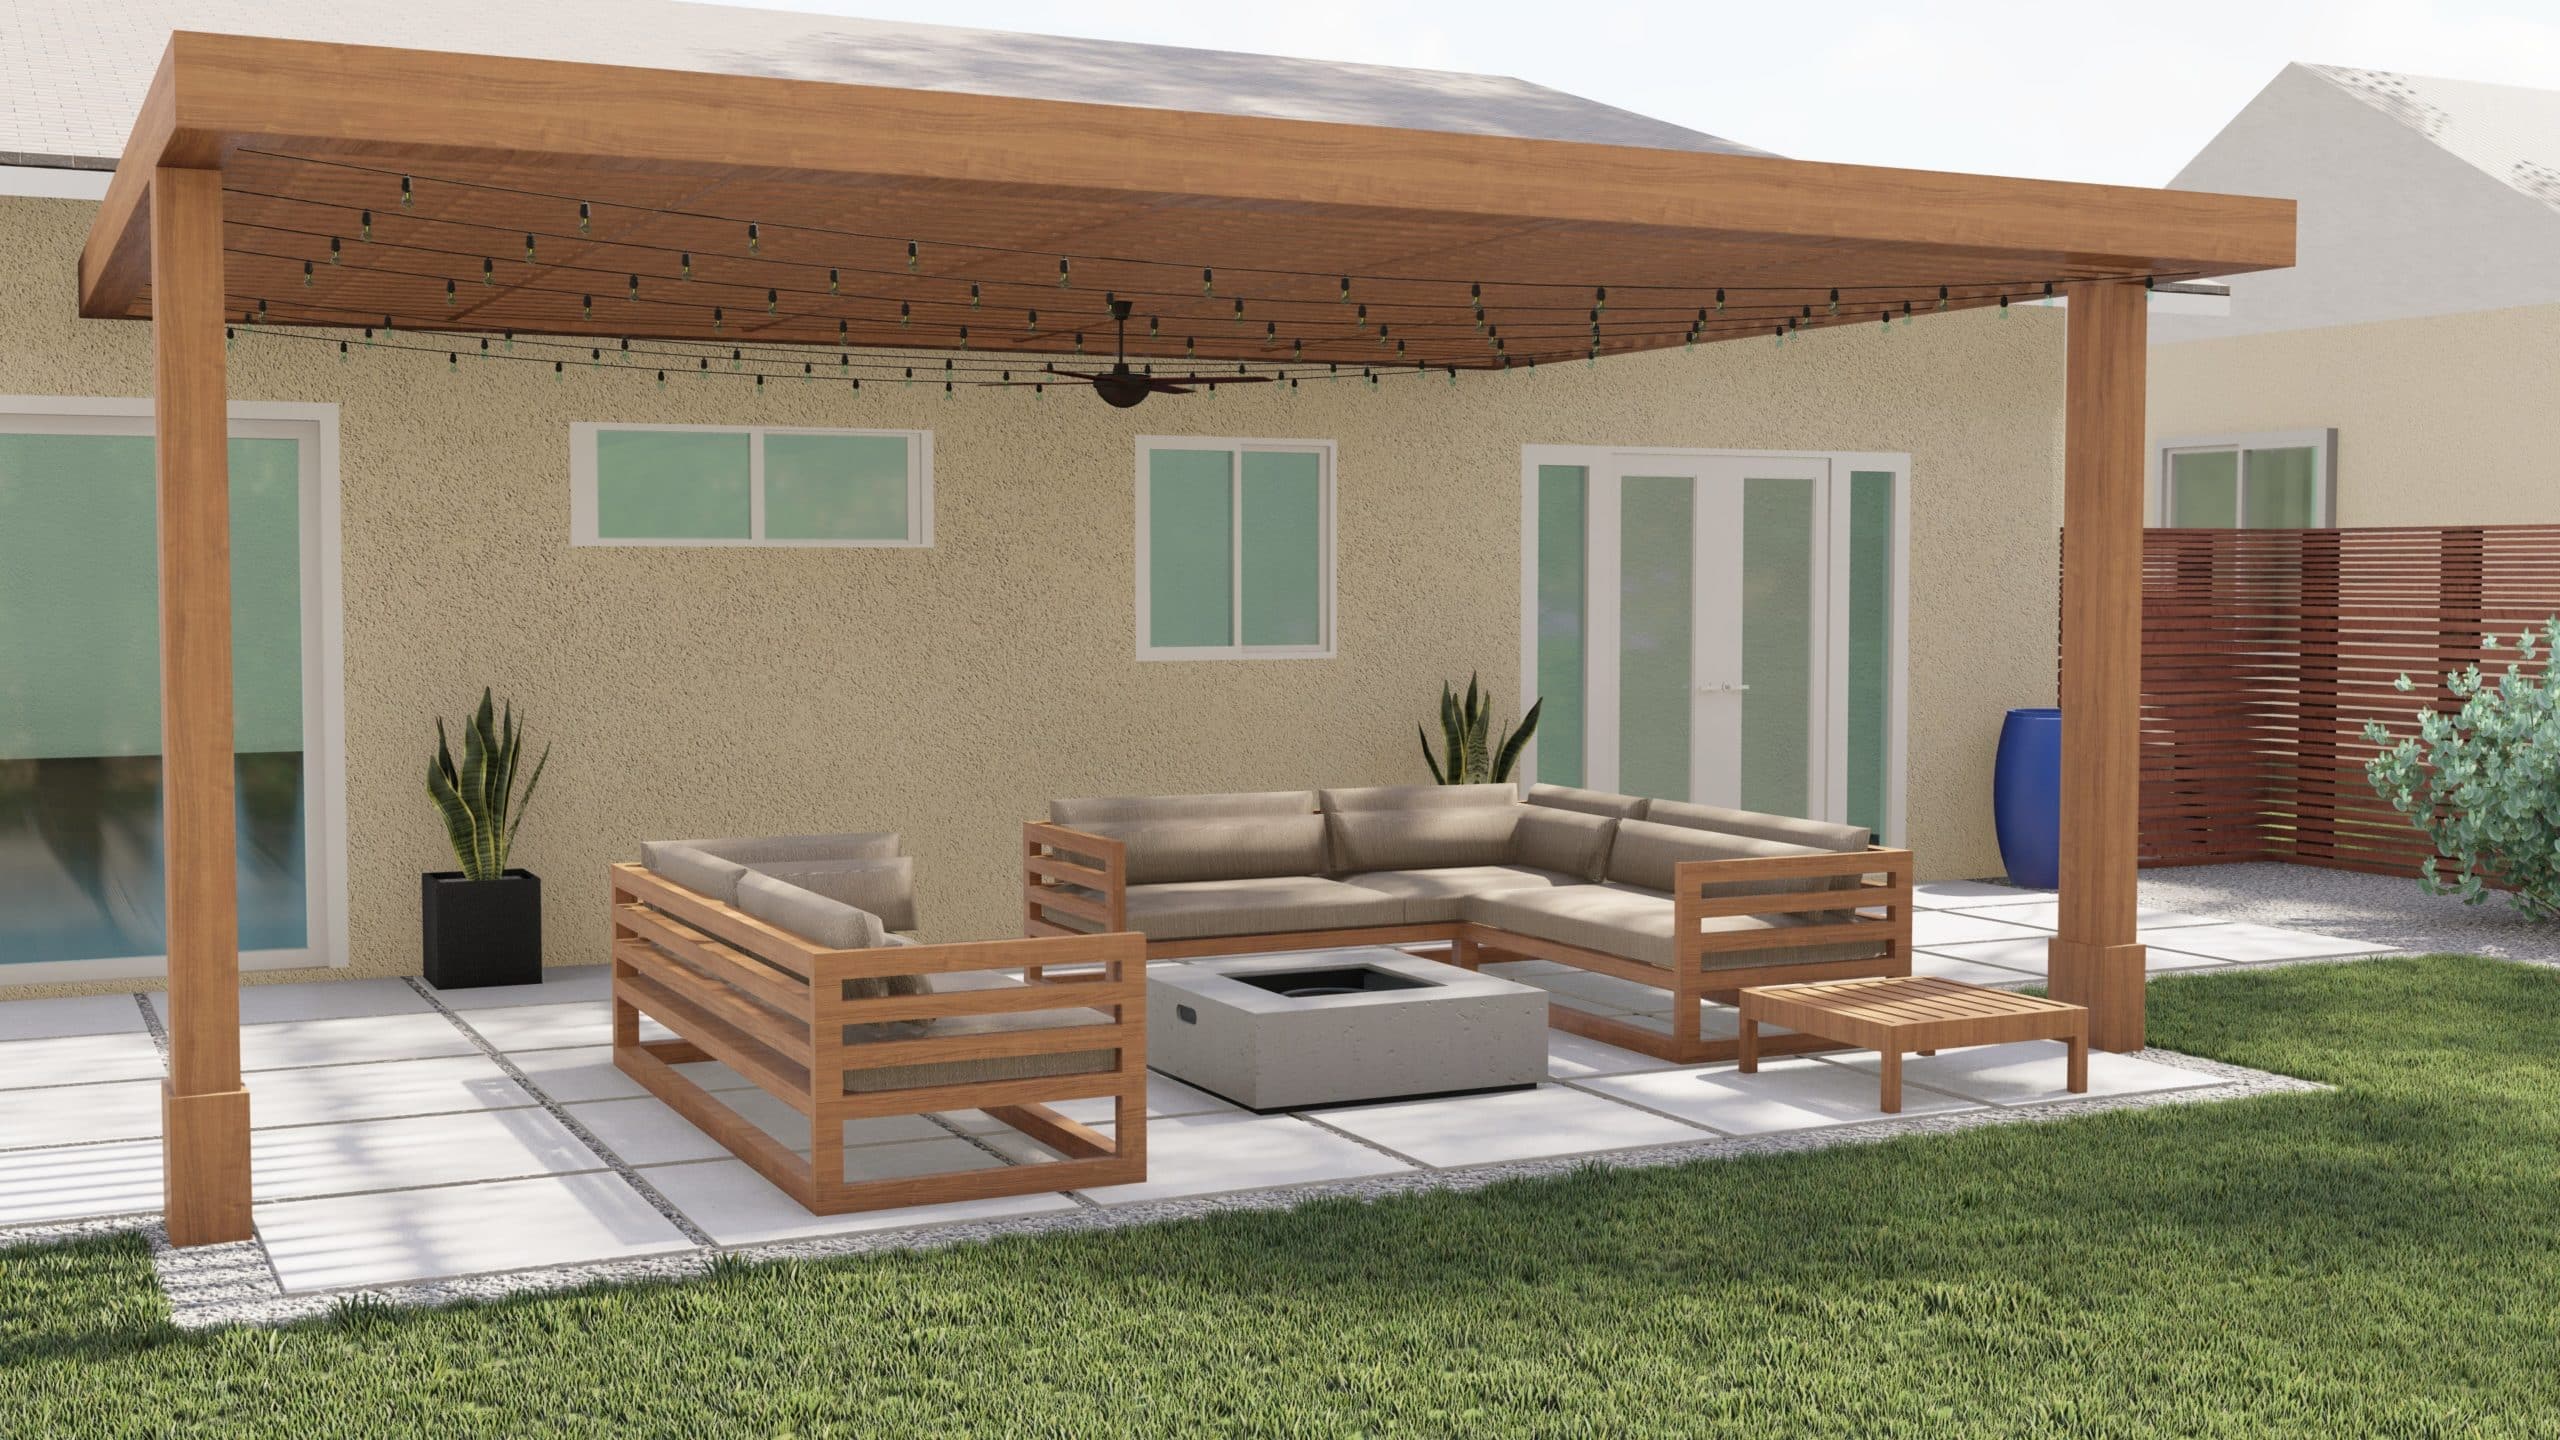 3D design render of pergola covered fire pit seating area off back of home